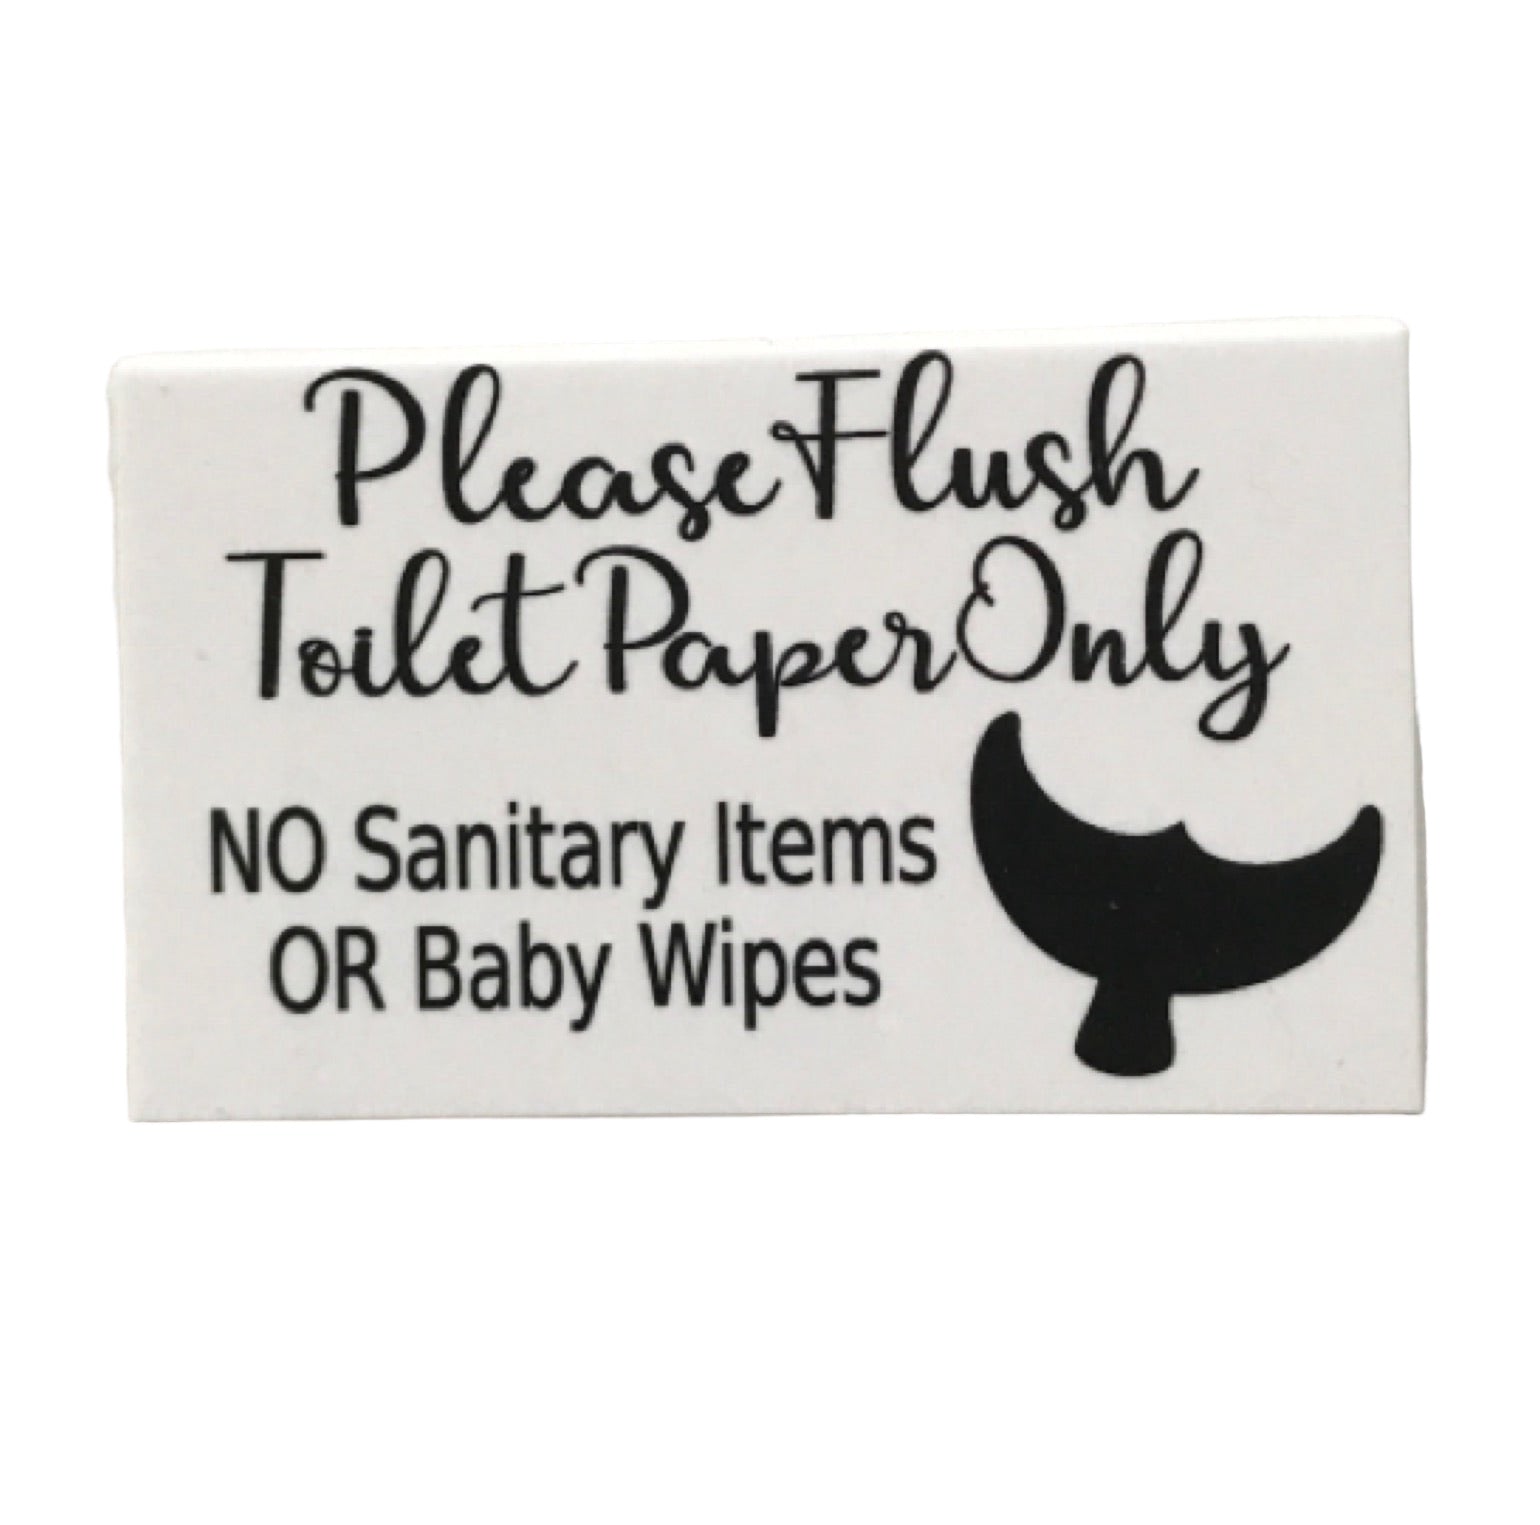 Toilet Paper Only No Sanitary Baby Wipes Whale White Sign - The Renmy Store Homewares & Gifts 